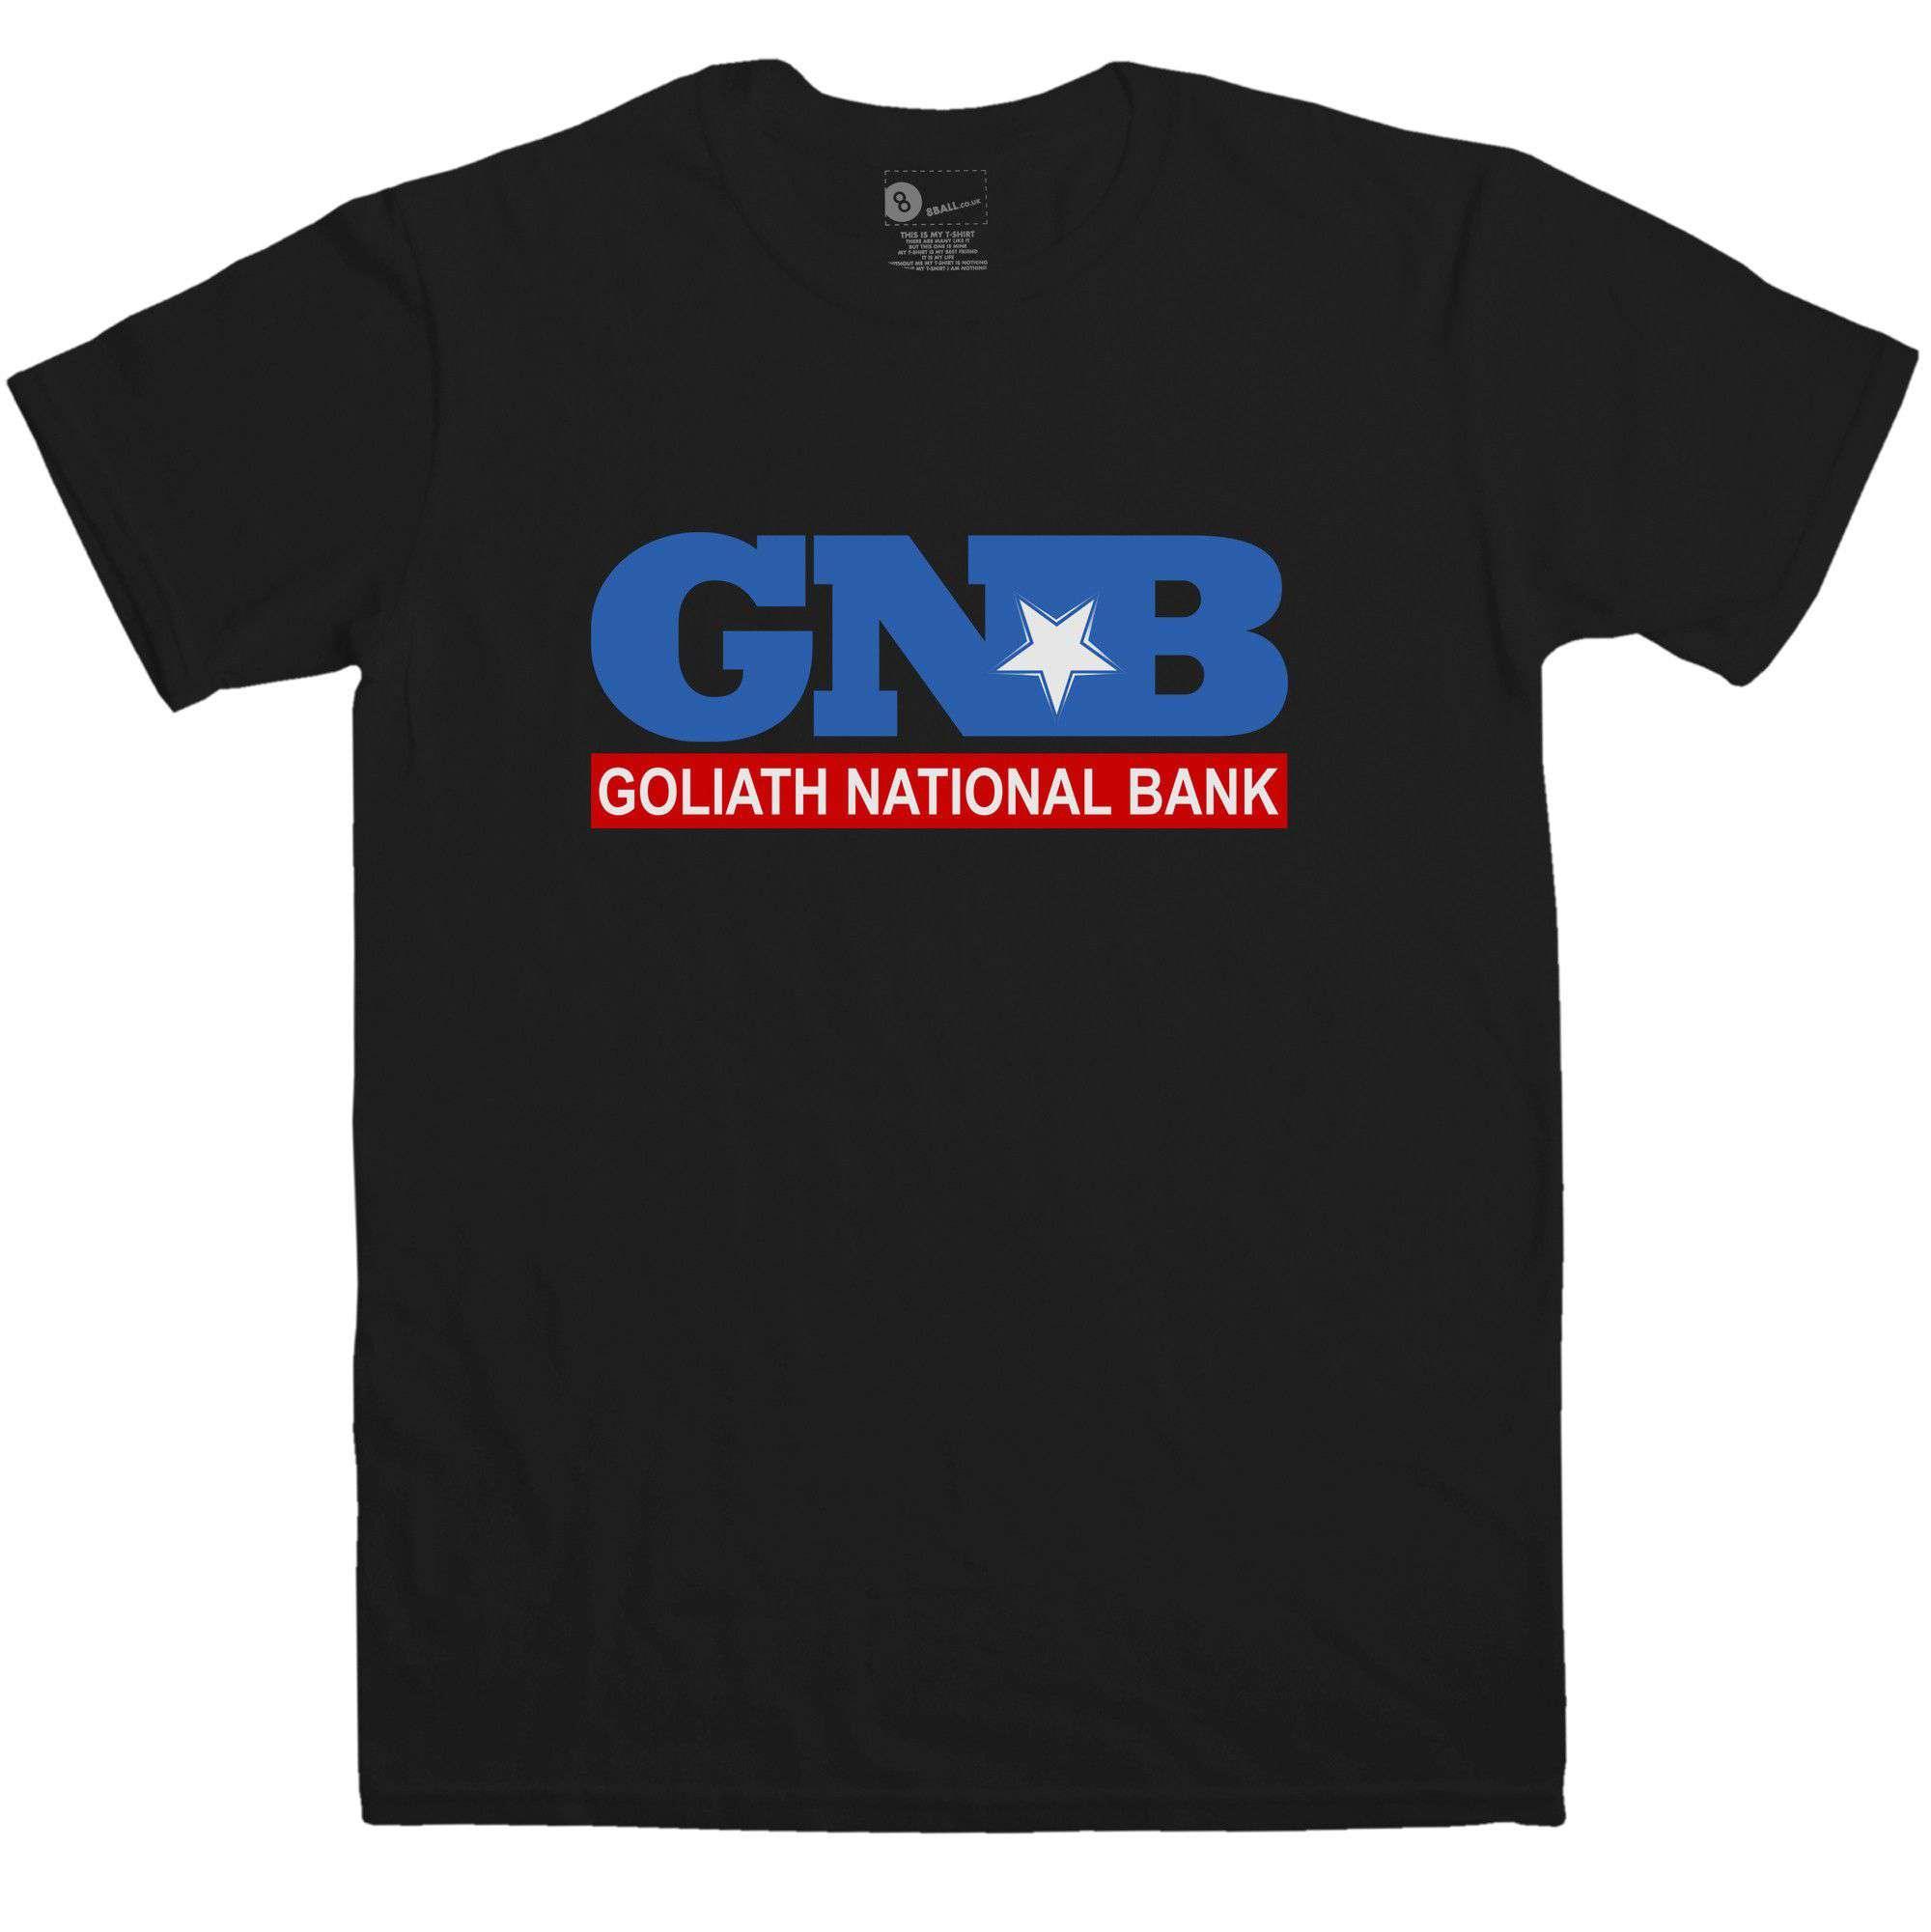 Goliath National Bank T-Shirt Inspired By How I Met Your Mother - Black